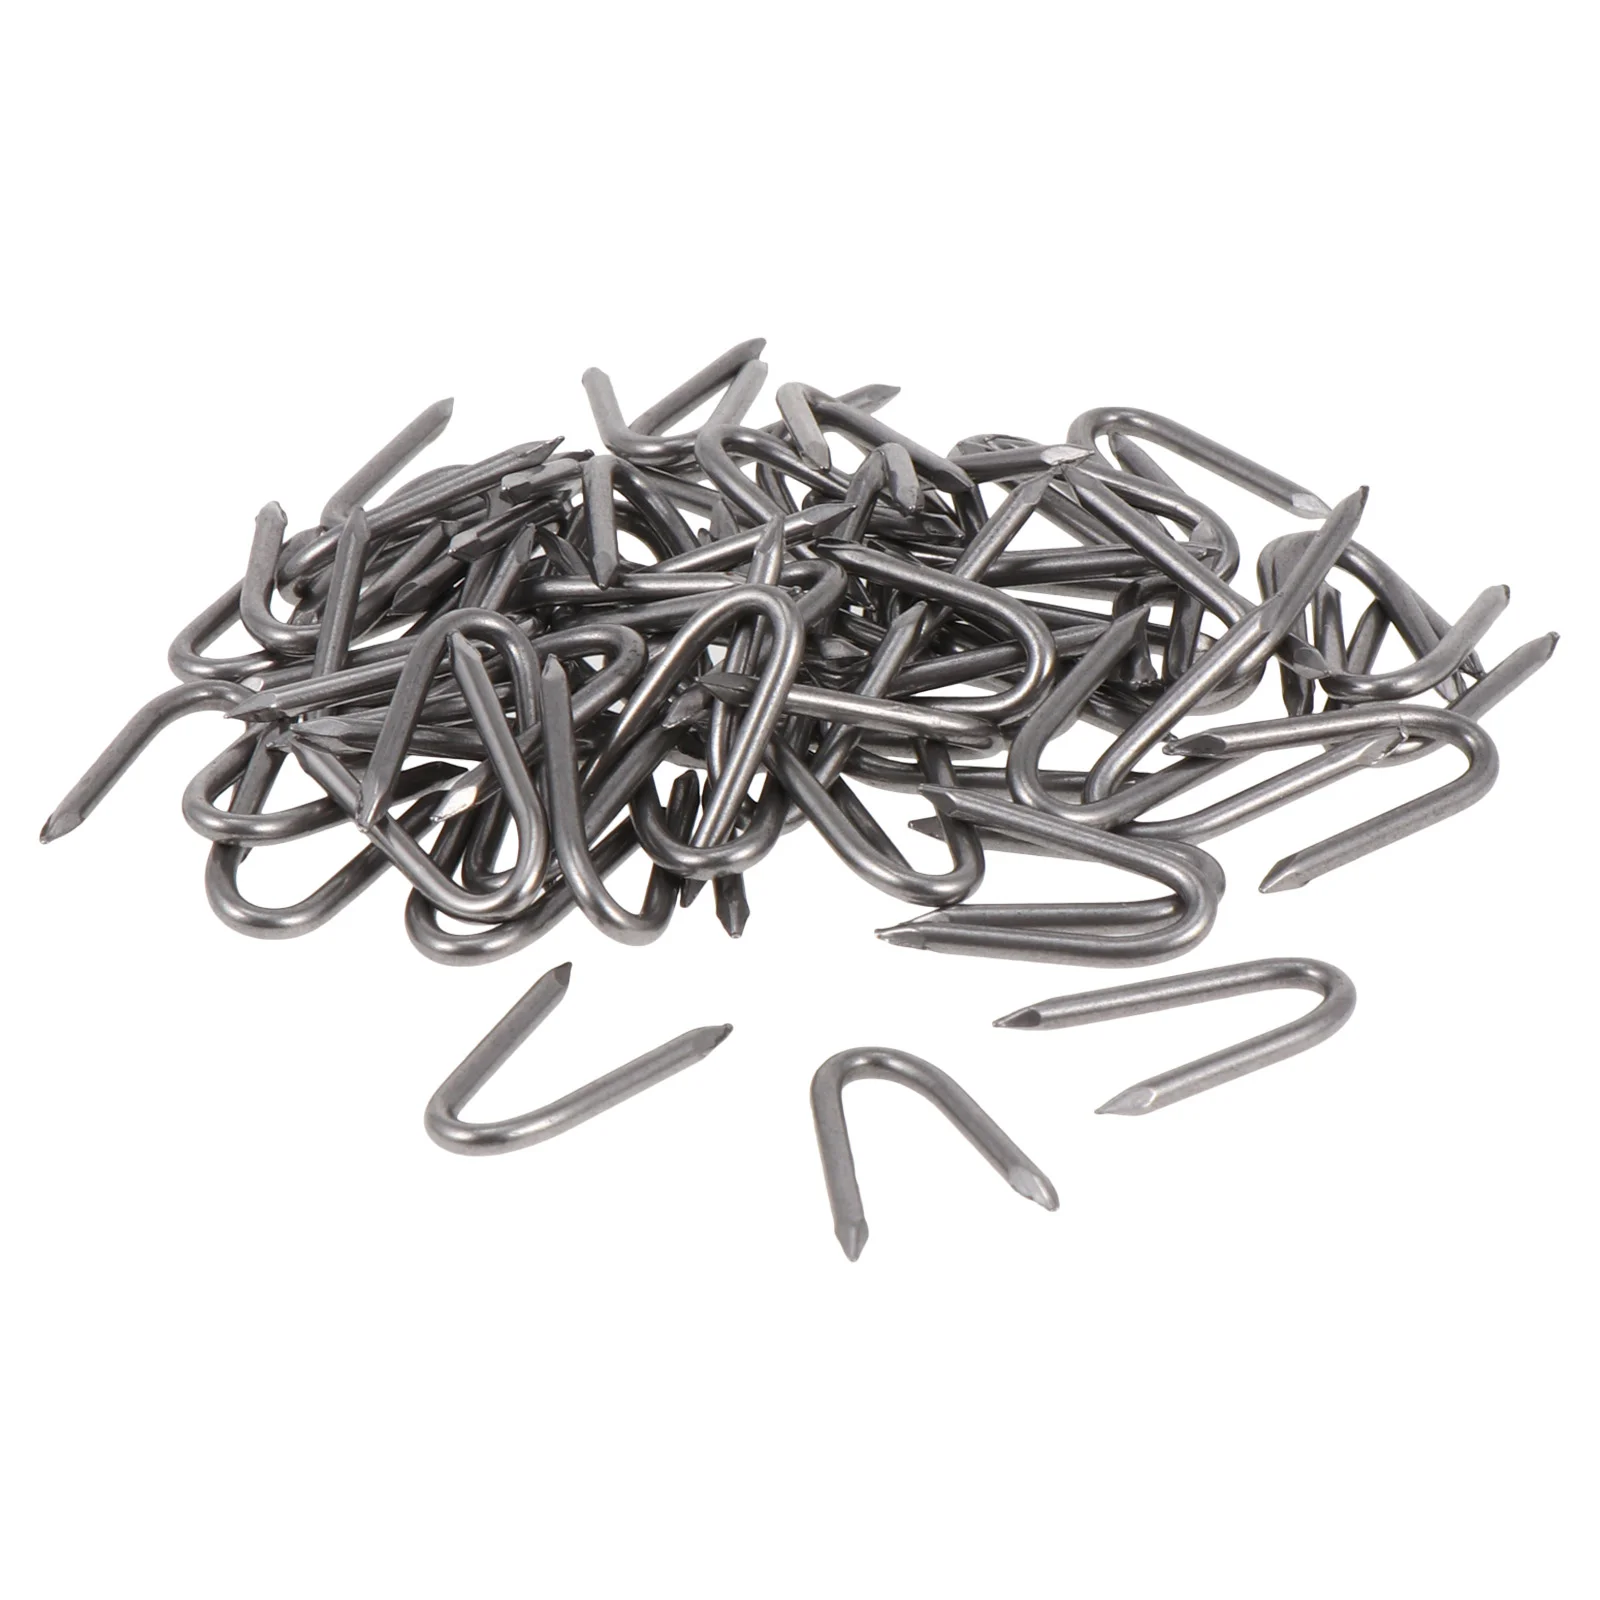 

70pcs Cable Staples Grass Lawn Turf Peg U-shaped Gardening Nail Lawn Fixer Garden Ground